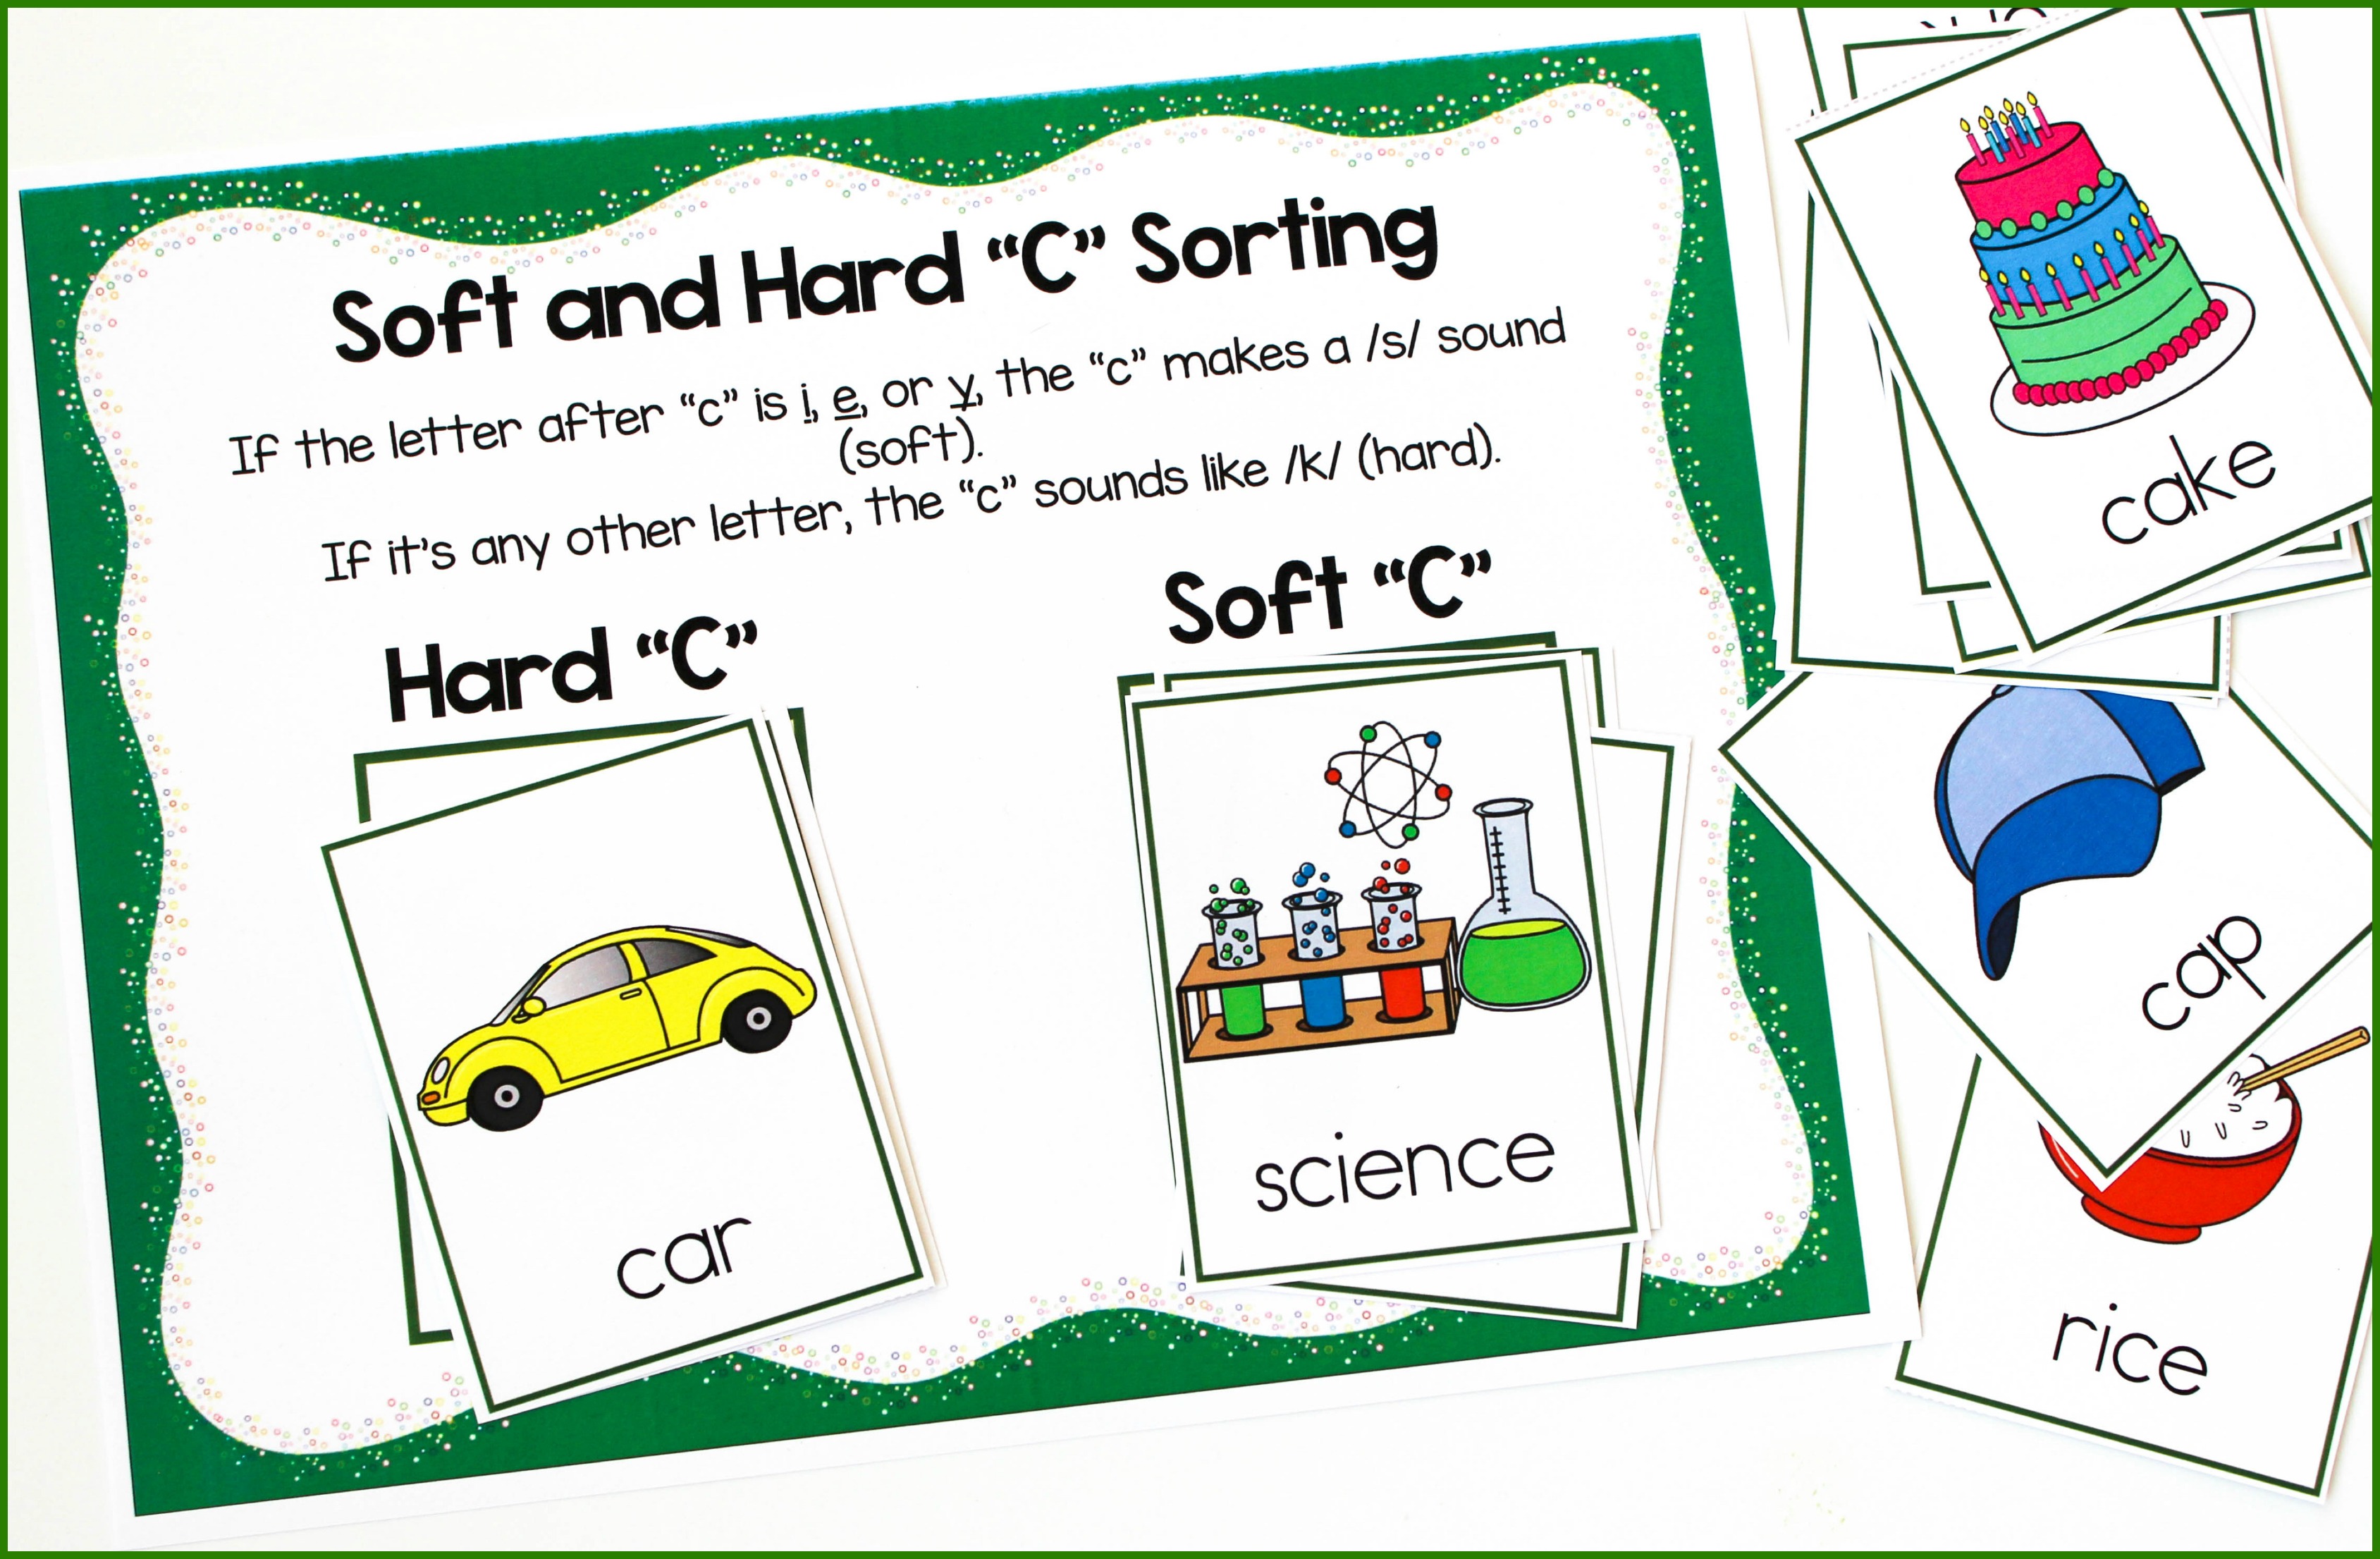 Hard and soft c and g game